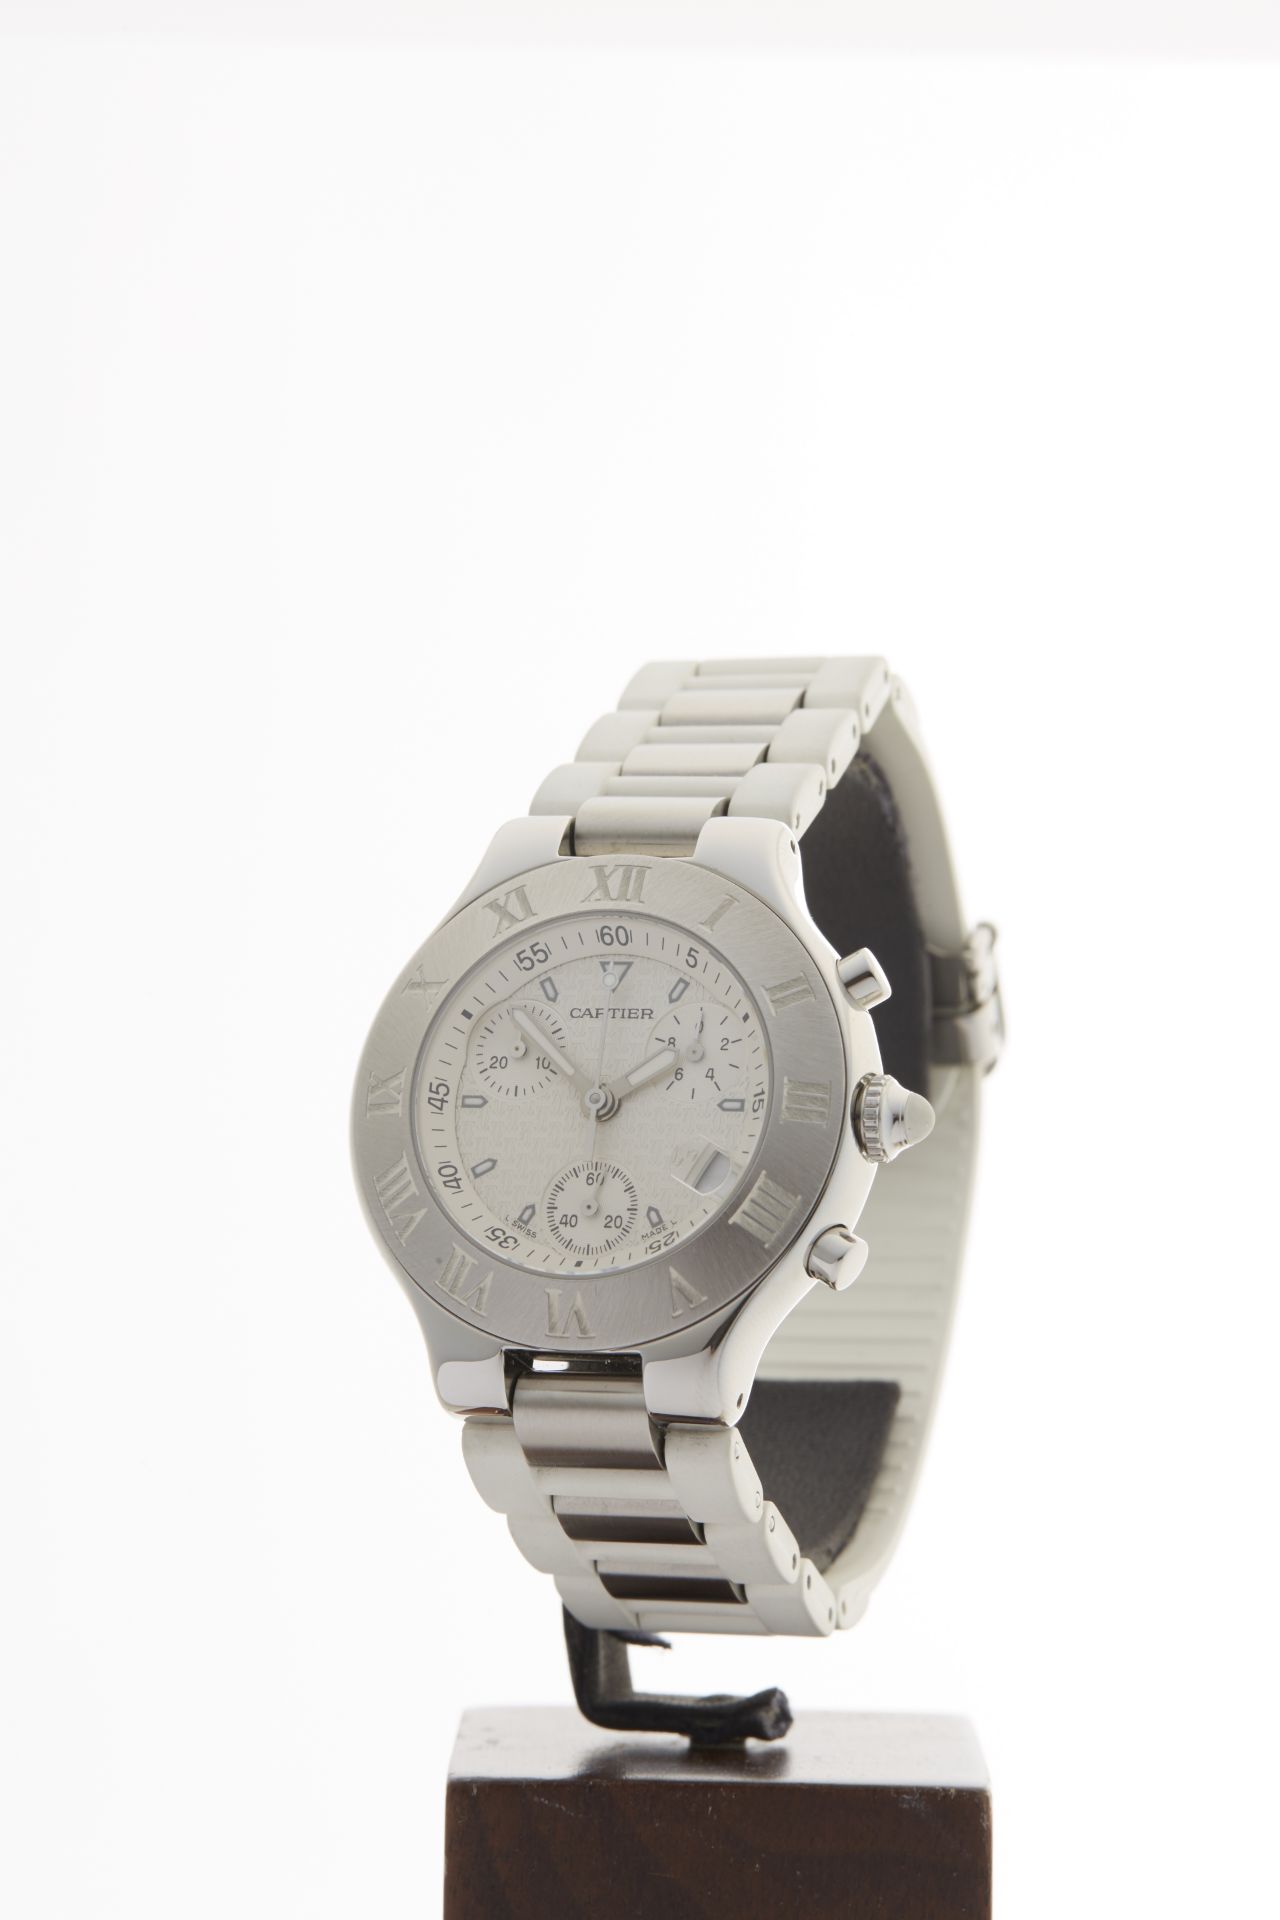 Cartier Must de 21 Chronoscaph 38mm Stainless Steel 2424 - Image 11 of 16